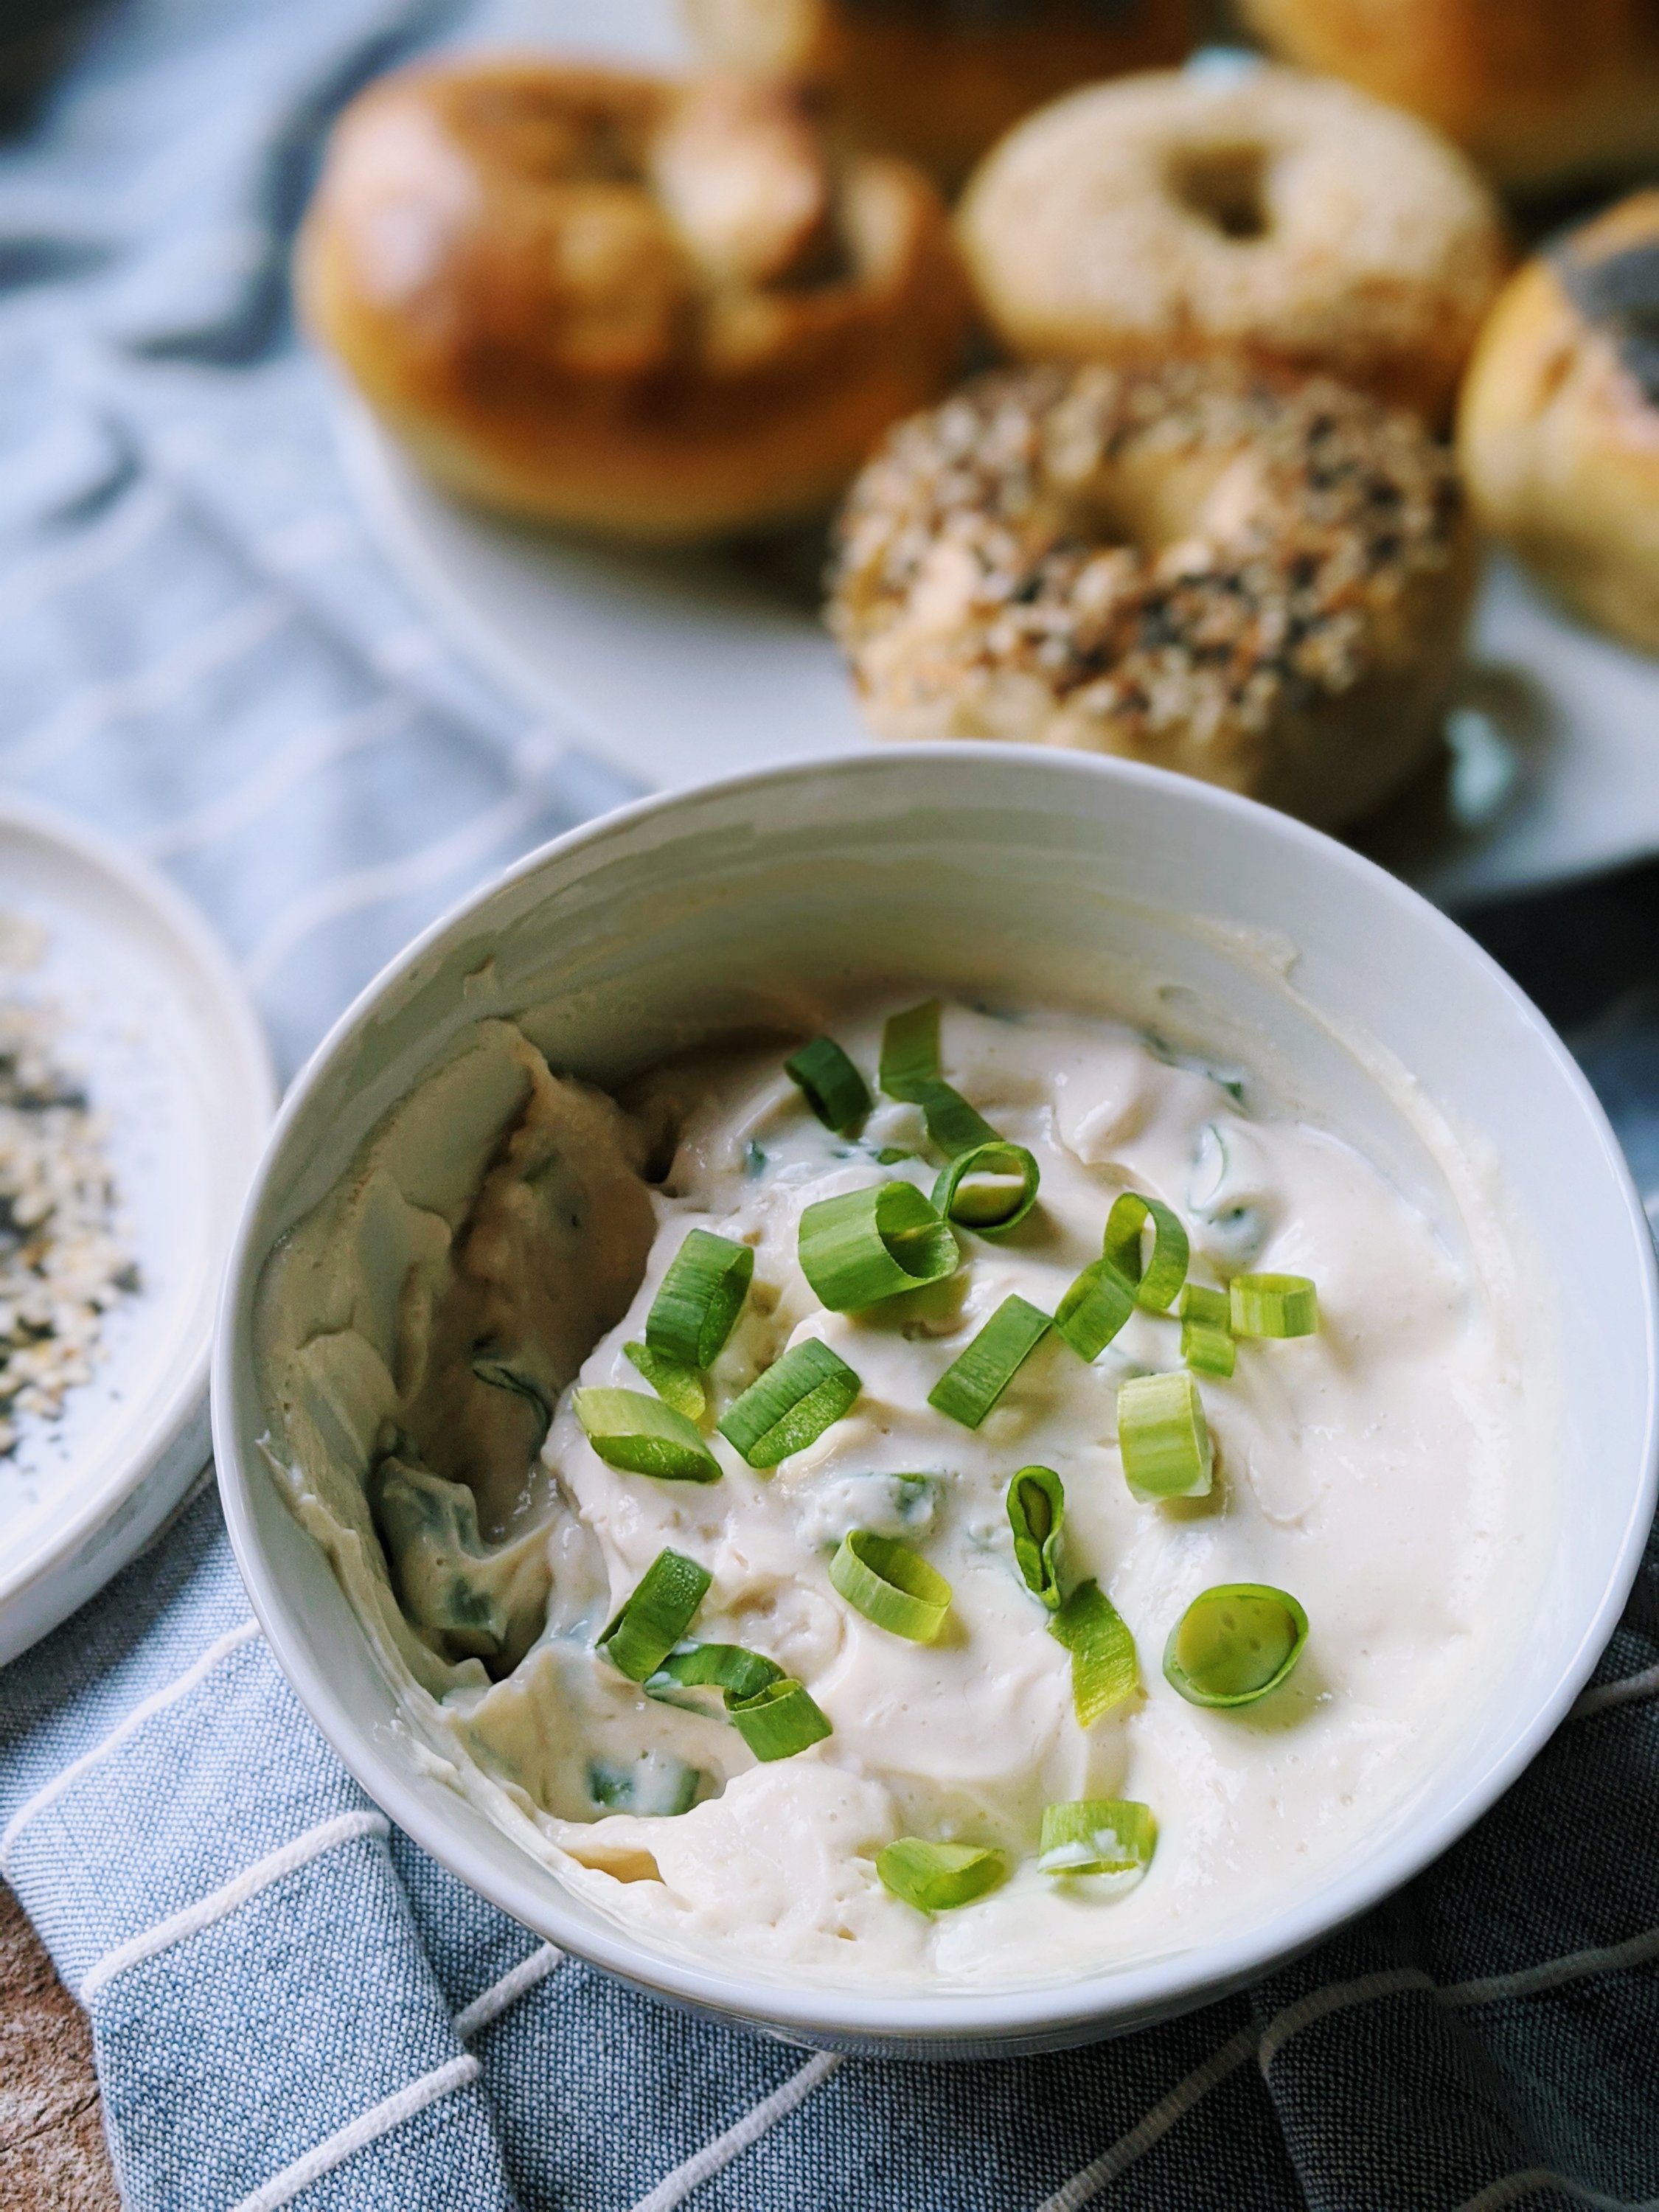 green onion and herb garlic vegan cream cheese with silken tofu recipe healthy high protein vegan breakfasts great for meal prep